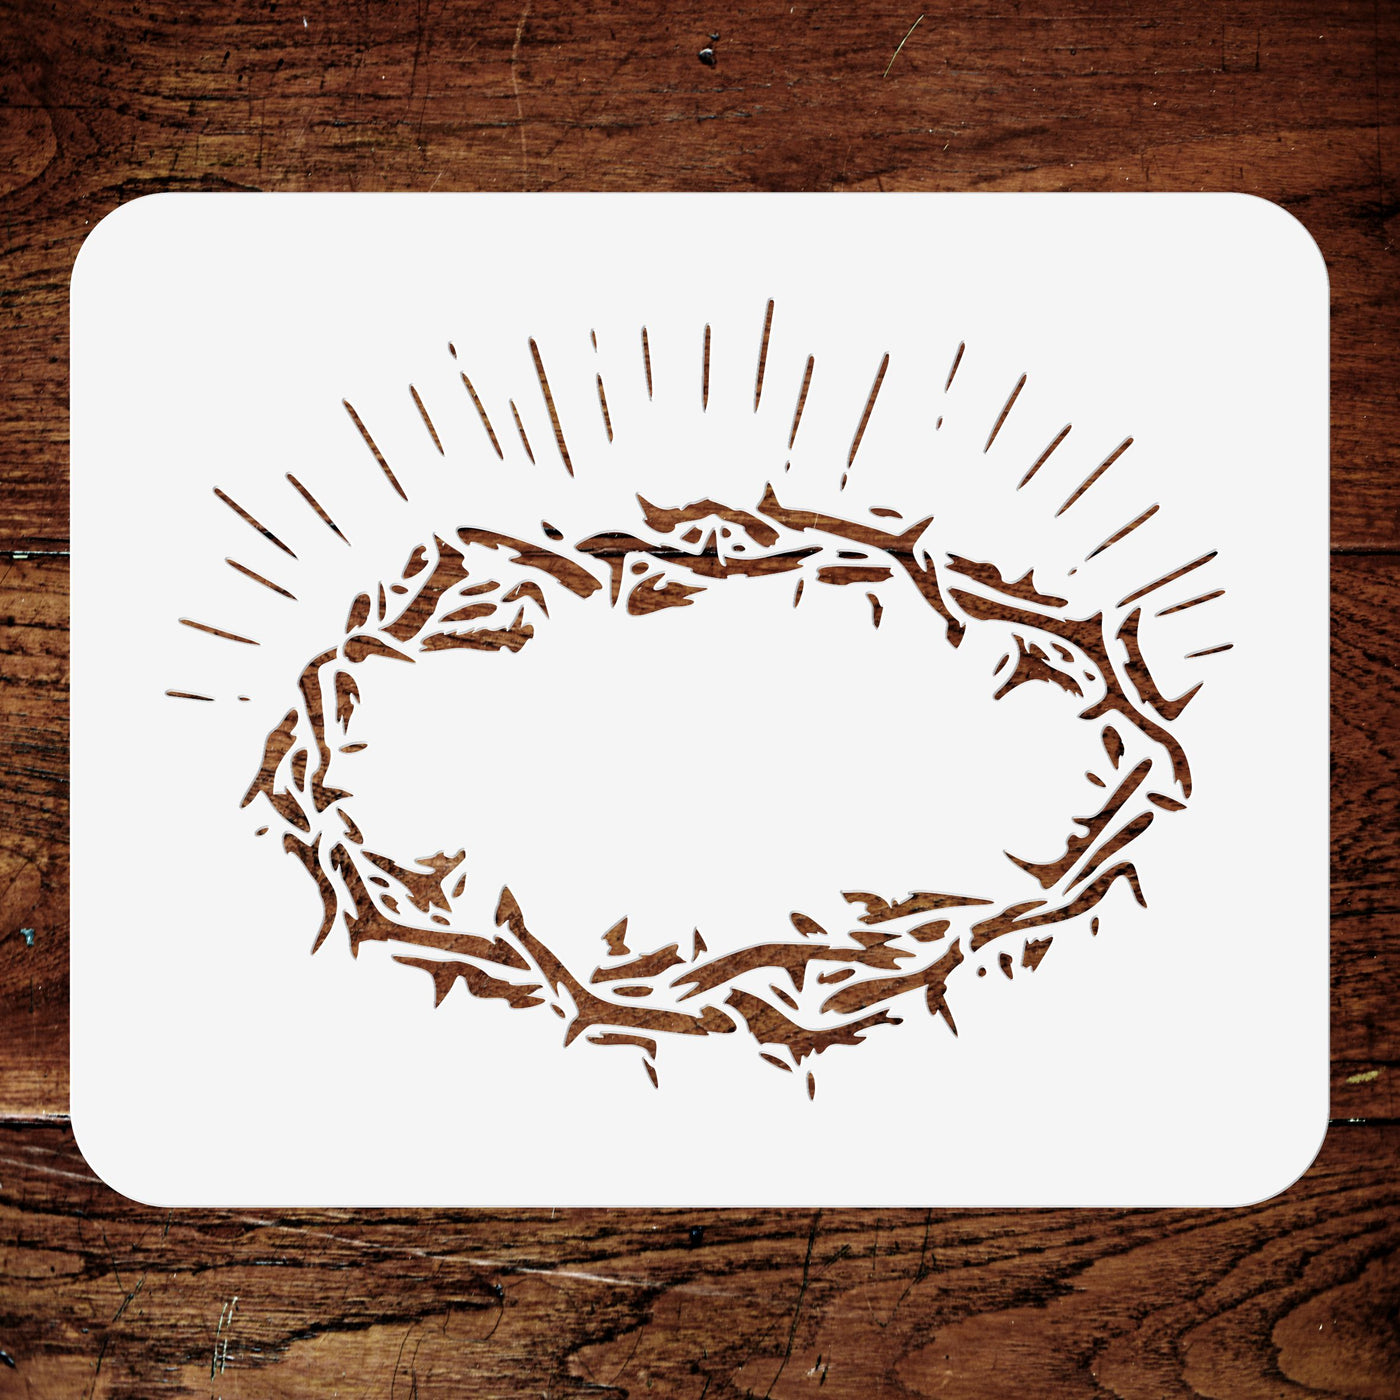 Crown of Thorns Stencil - Religious Woven Plaited Jesus Crown Wreath